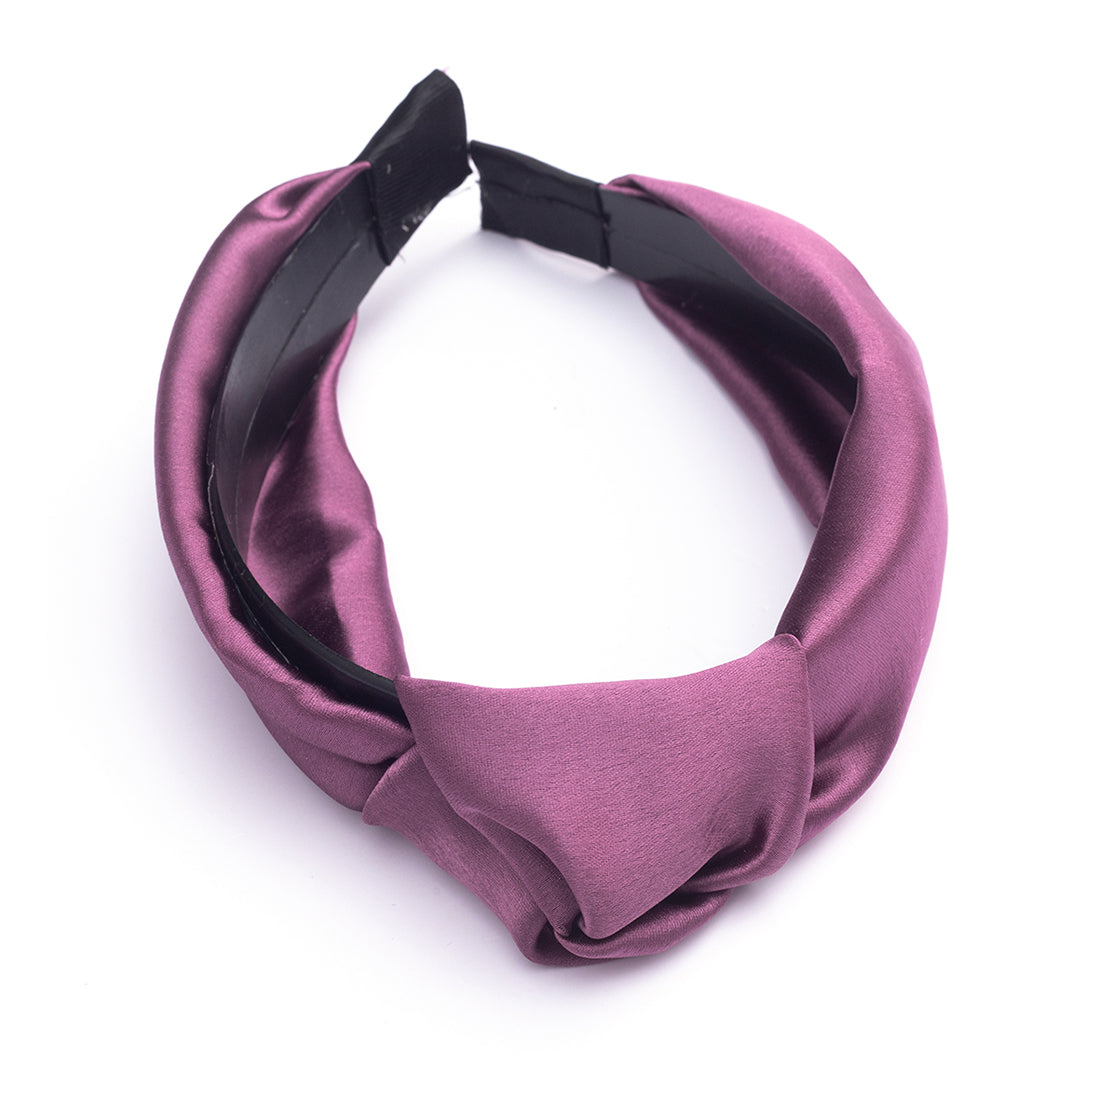 Luxurious Purple Satin Hairband, Adorned With A Stylish Top Knot, Ideal For A Sophisticated Look.